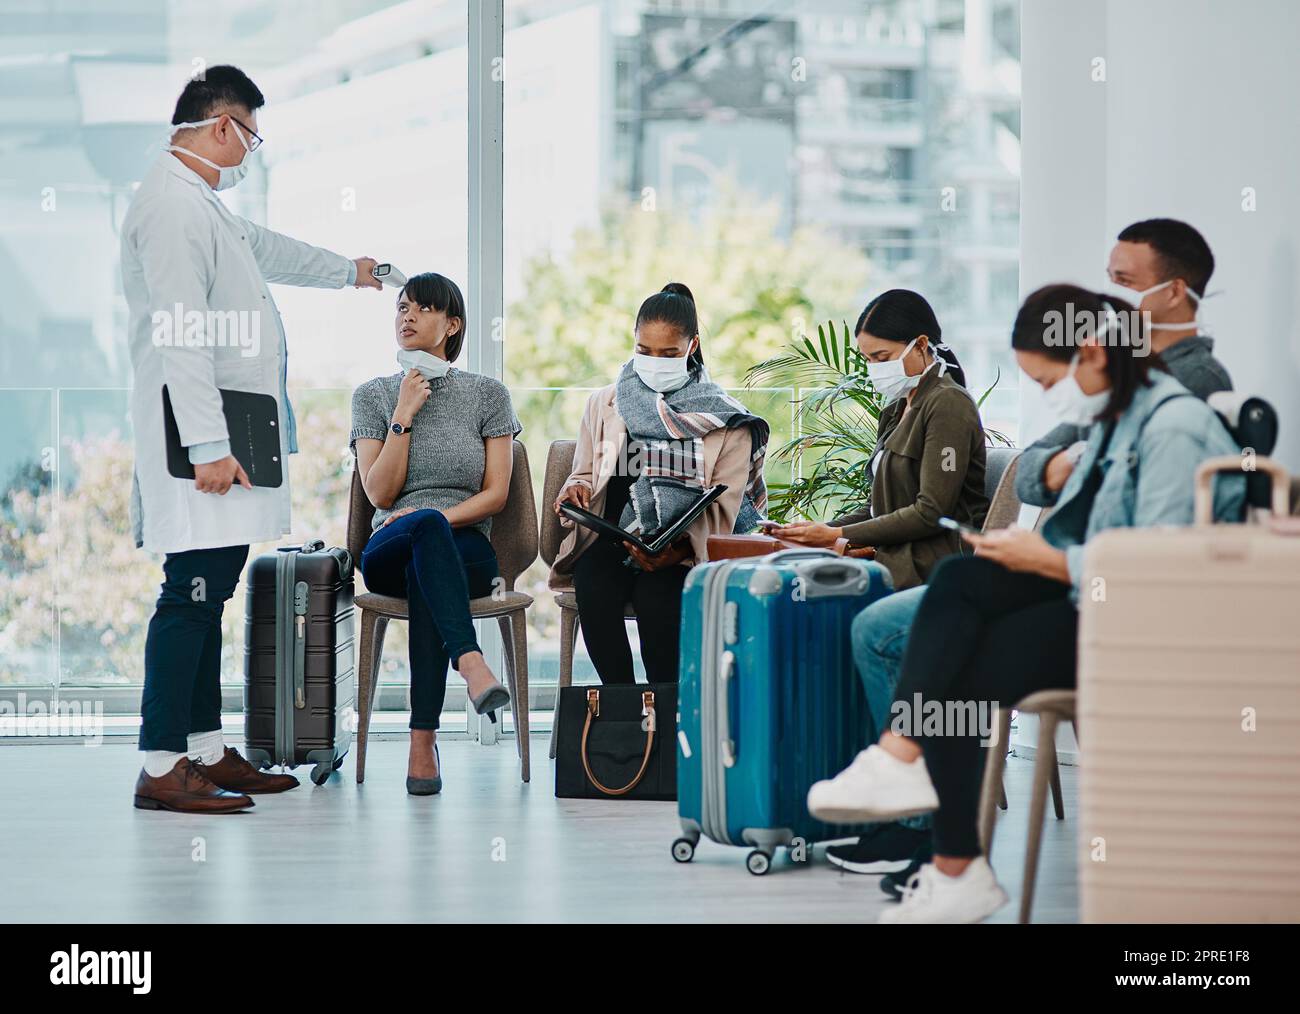 Covid doctor taking temperature of travel passengers in covid masks during tourism in an airport with an infrared thermometer. Medical professional following safe protocol in an epidemic or outbreak Stock Photo